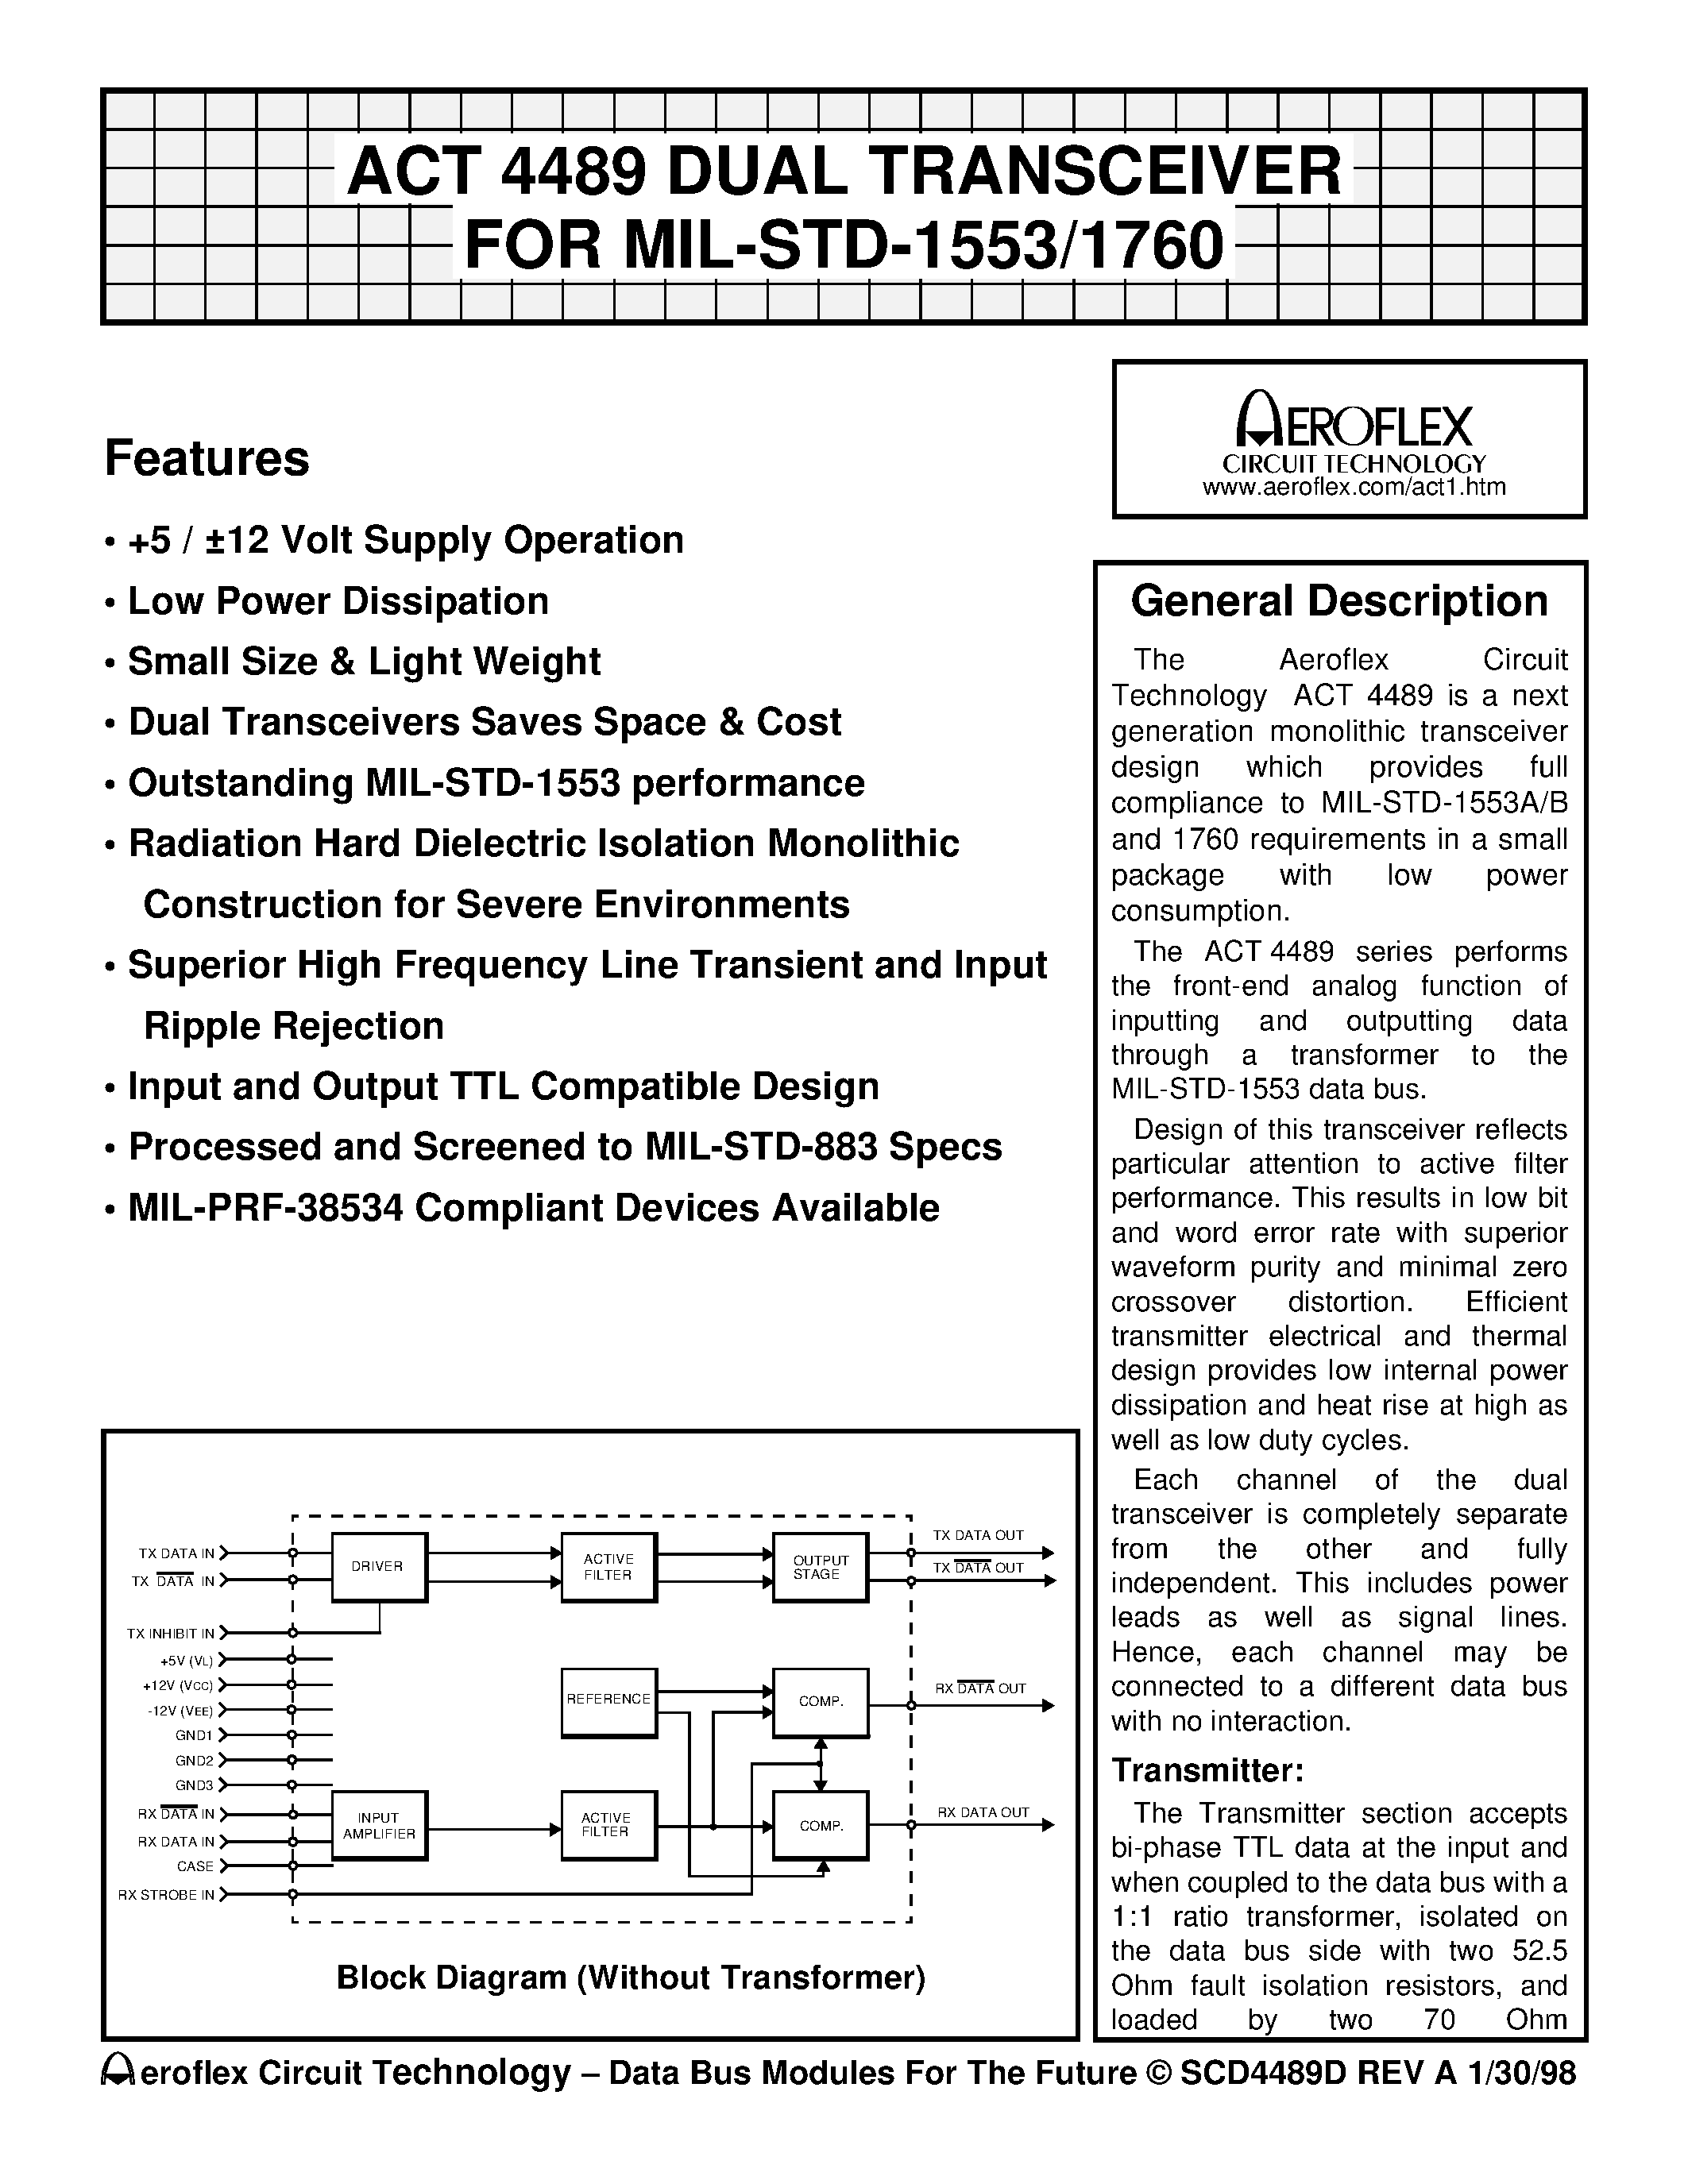 Datasheet ACT4489-DFI - ACT 4489 DUAL TRANSCEIVER FOR MIL-STD-1553/1760 page 1